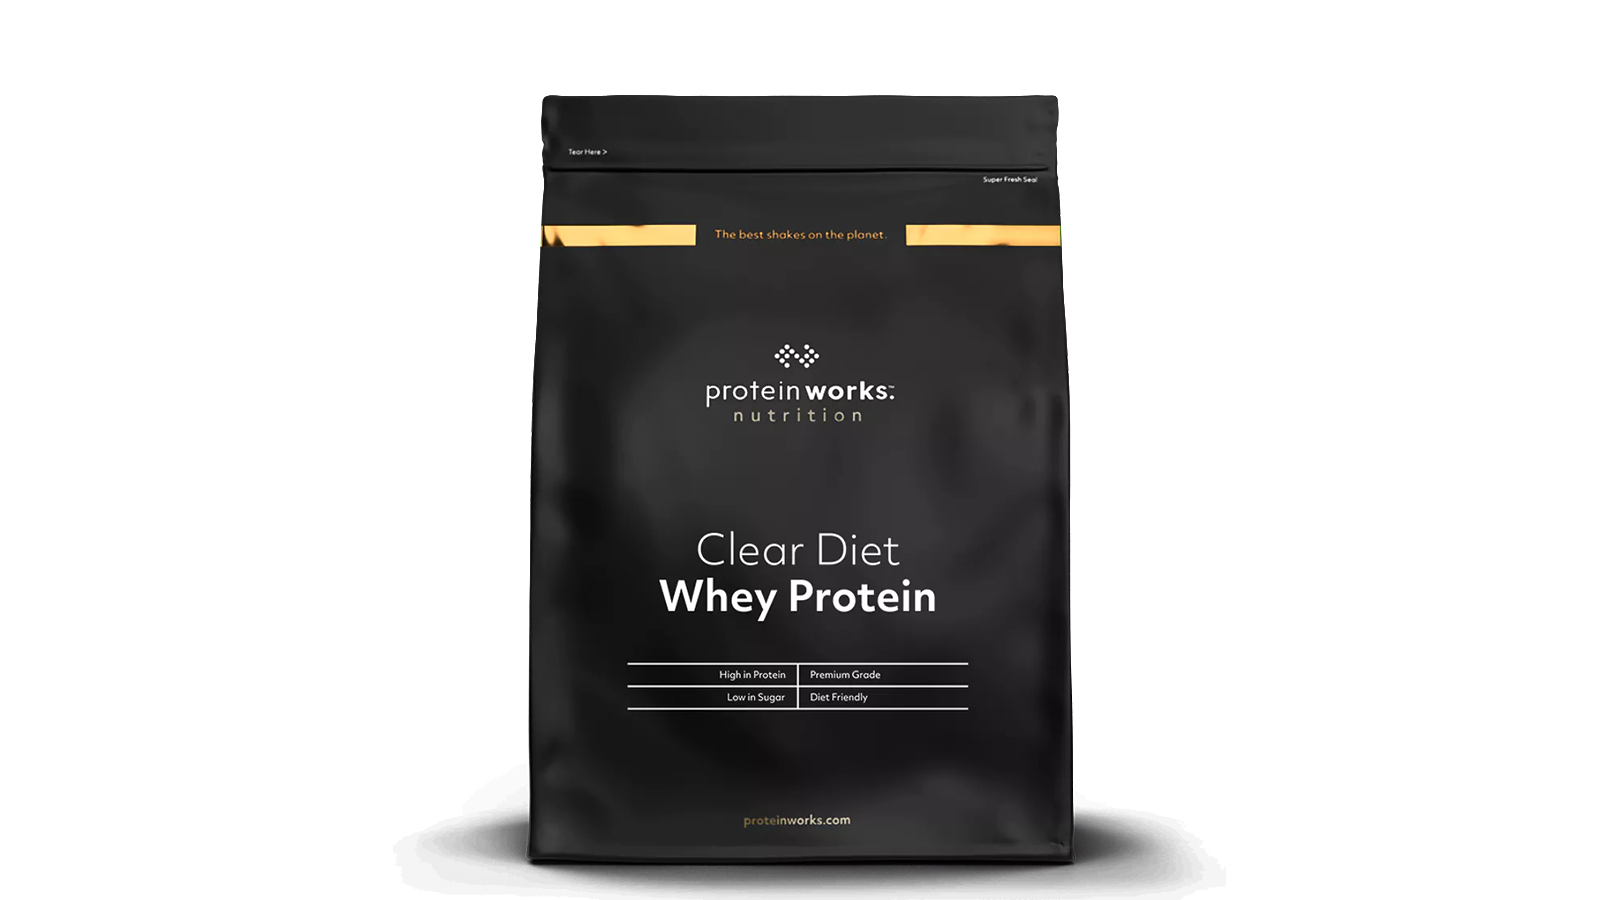 5. The Protein Works